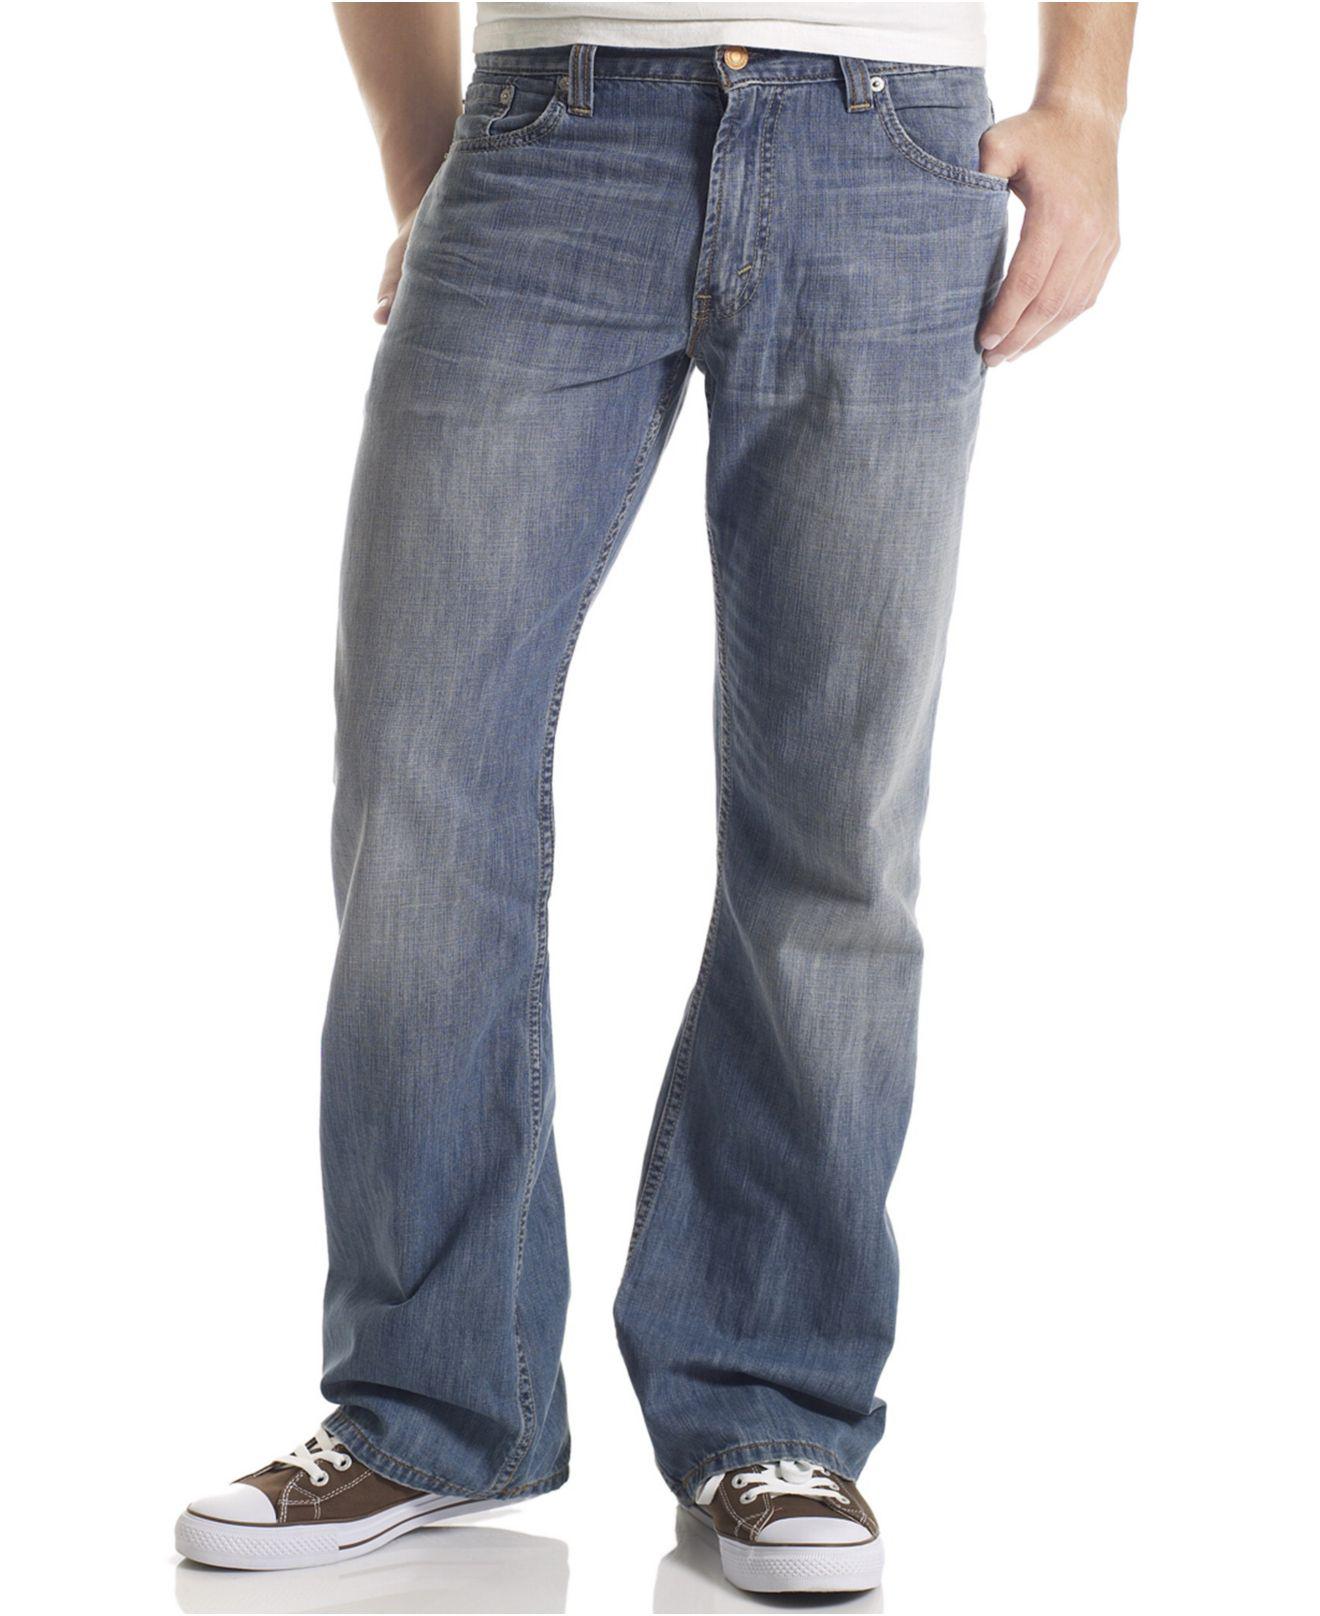 Lyst - Levi's 527 Slim Bootcut Fit Jeans in Blue for Men